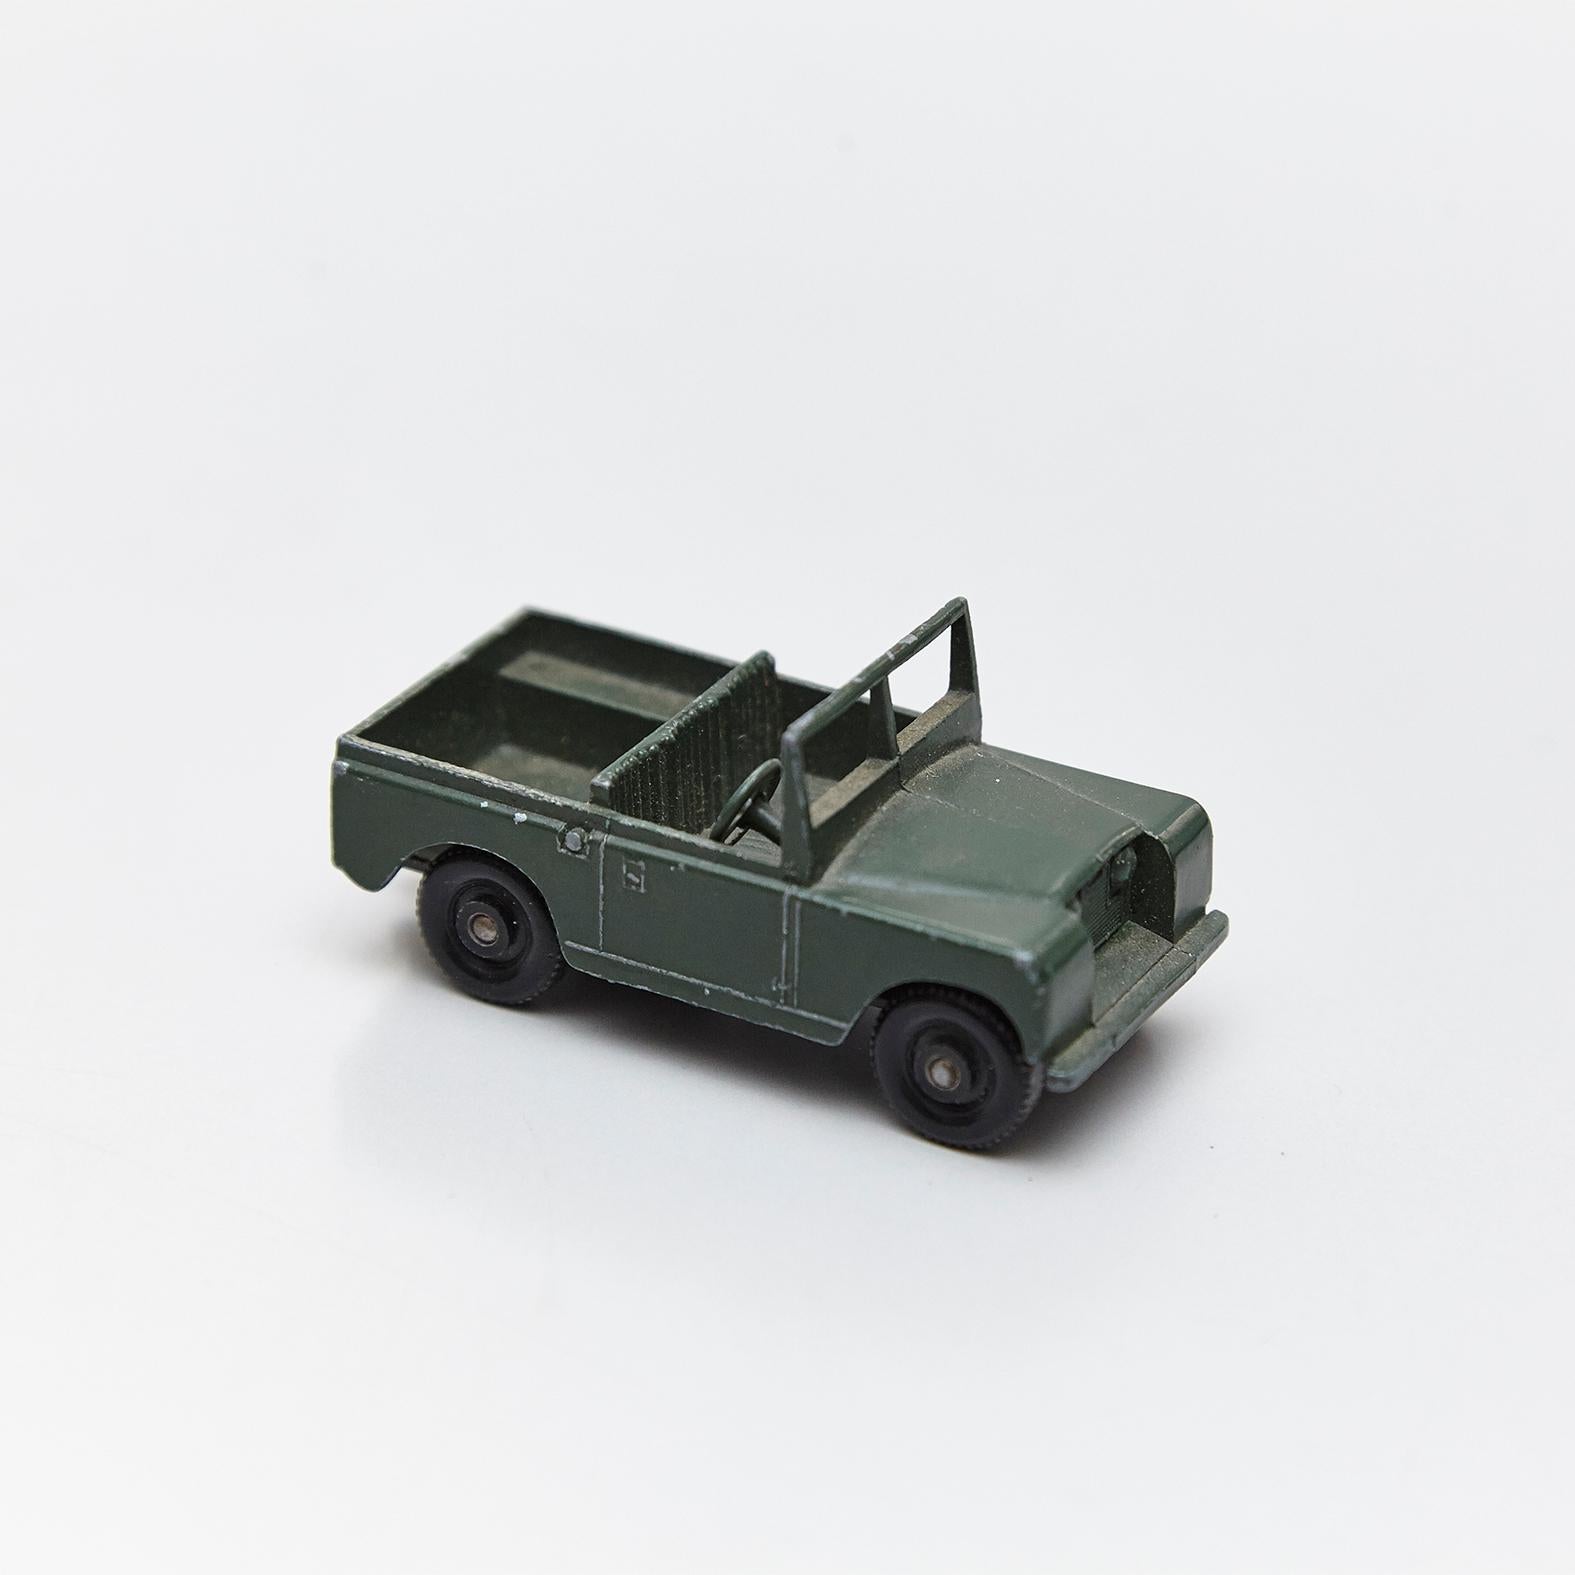 British Lesney Matchboxes Series Antique Metal Toy Cars Green Military, Free Shipping